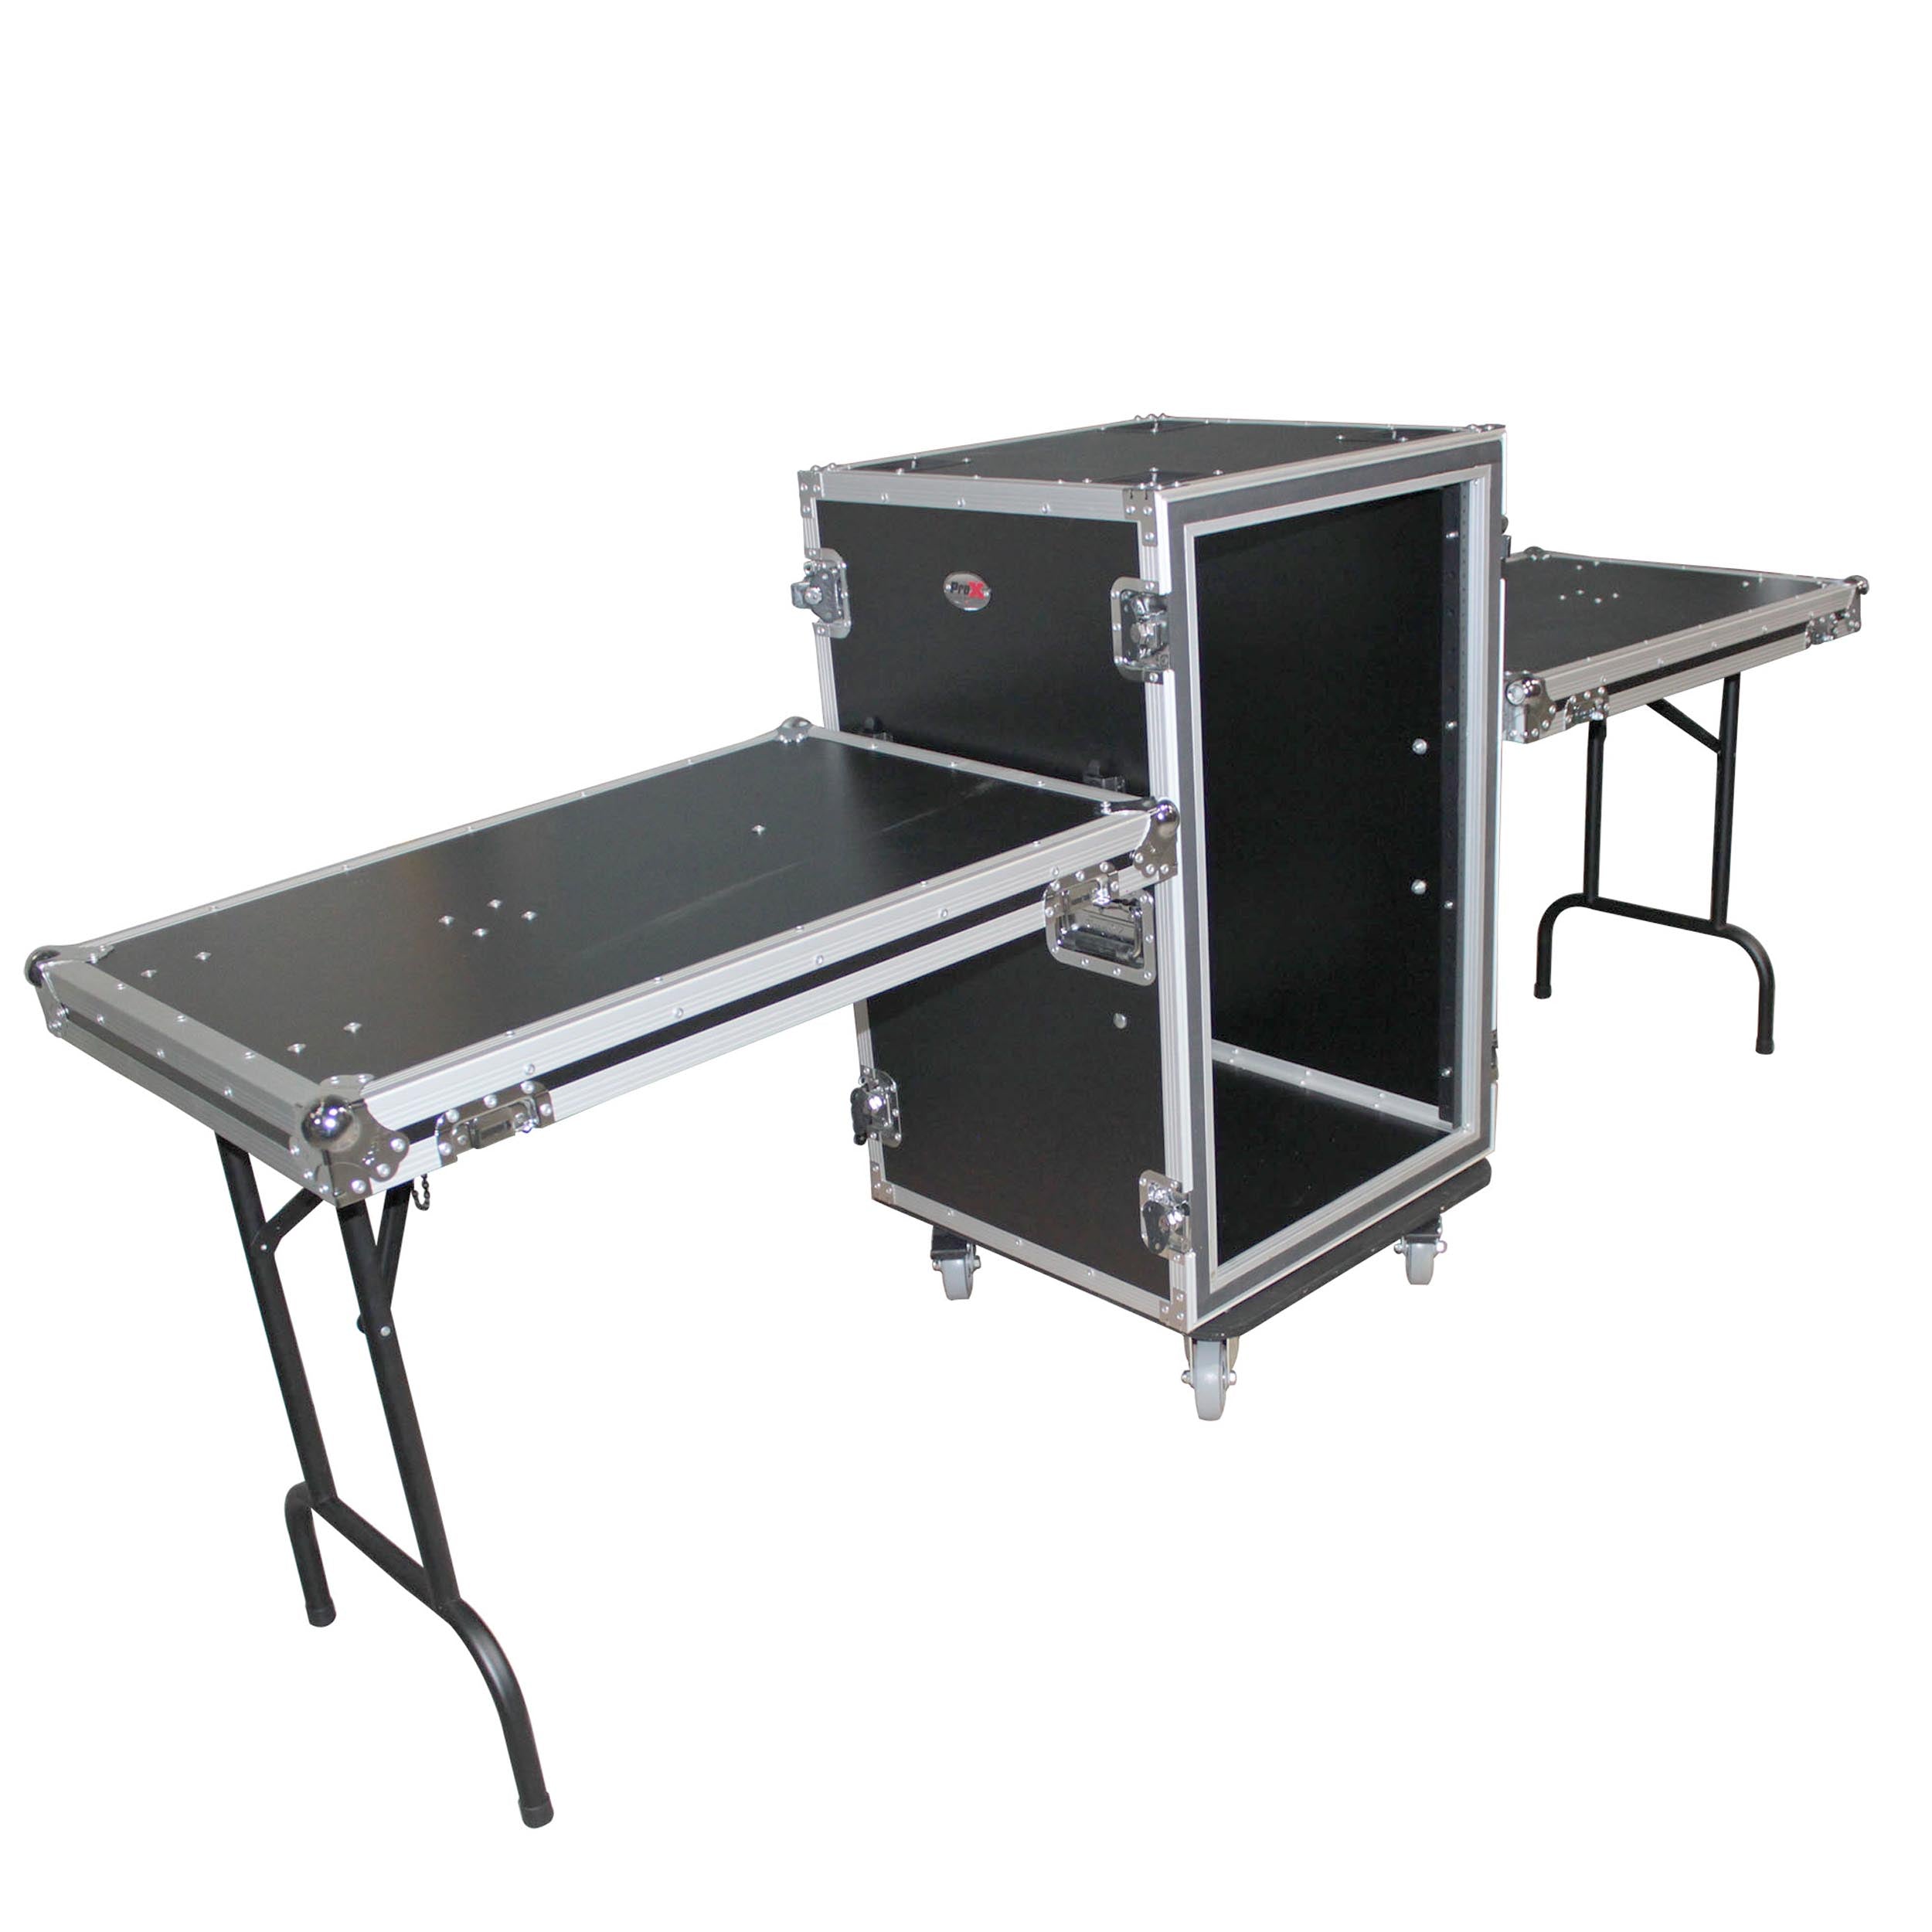 Pro X Vertical 24" deep Rail to RailShockproof Amp/Rack Case w/ dual side tables and 4 Casters T-14RSP24WDST